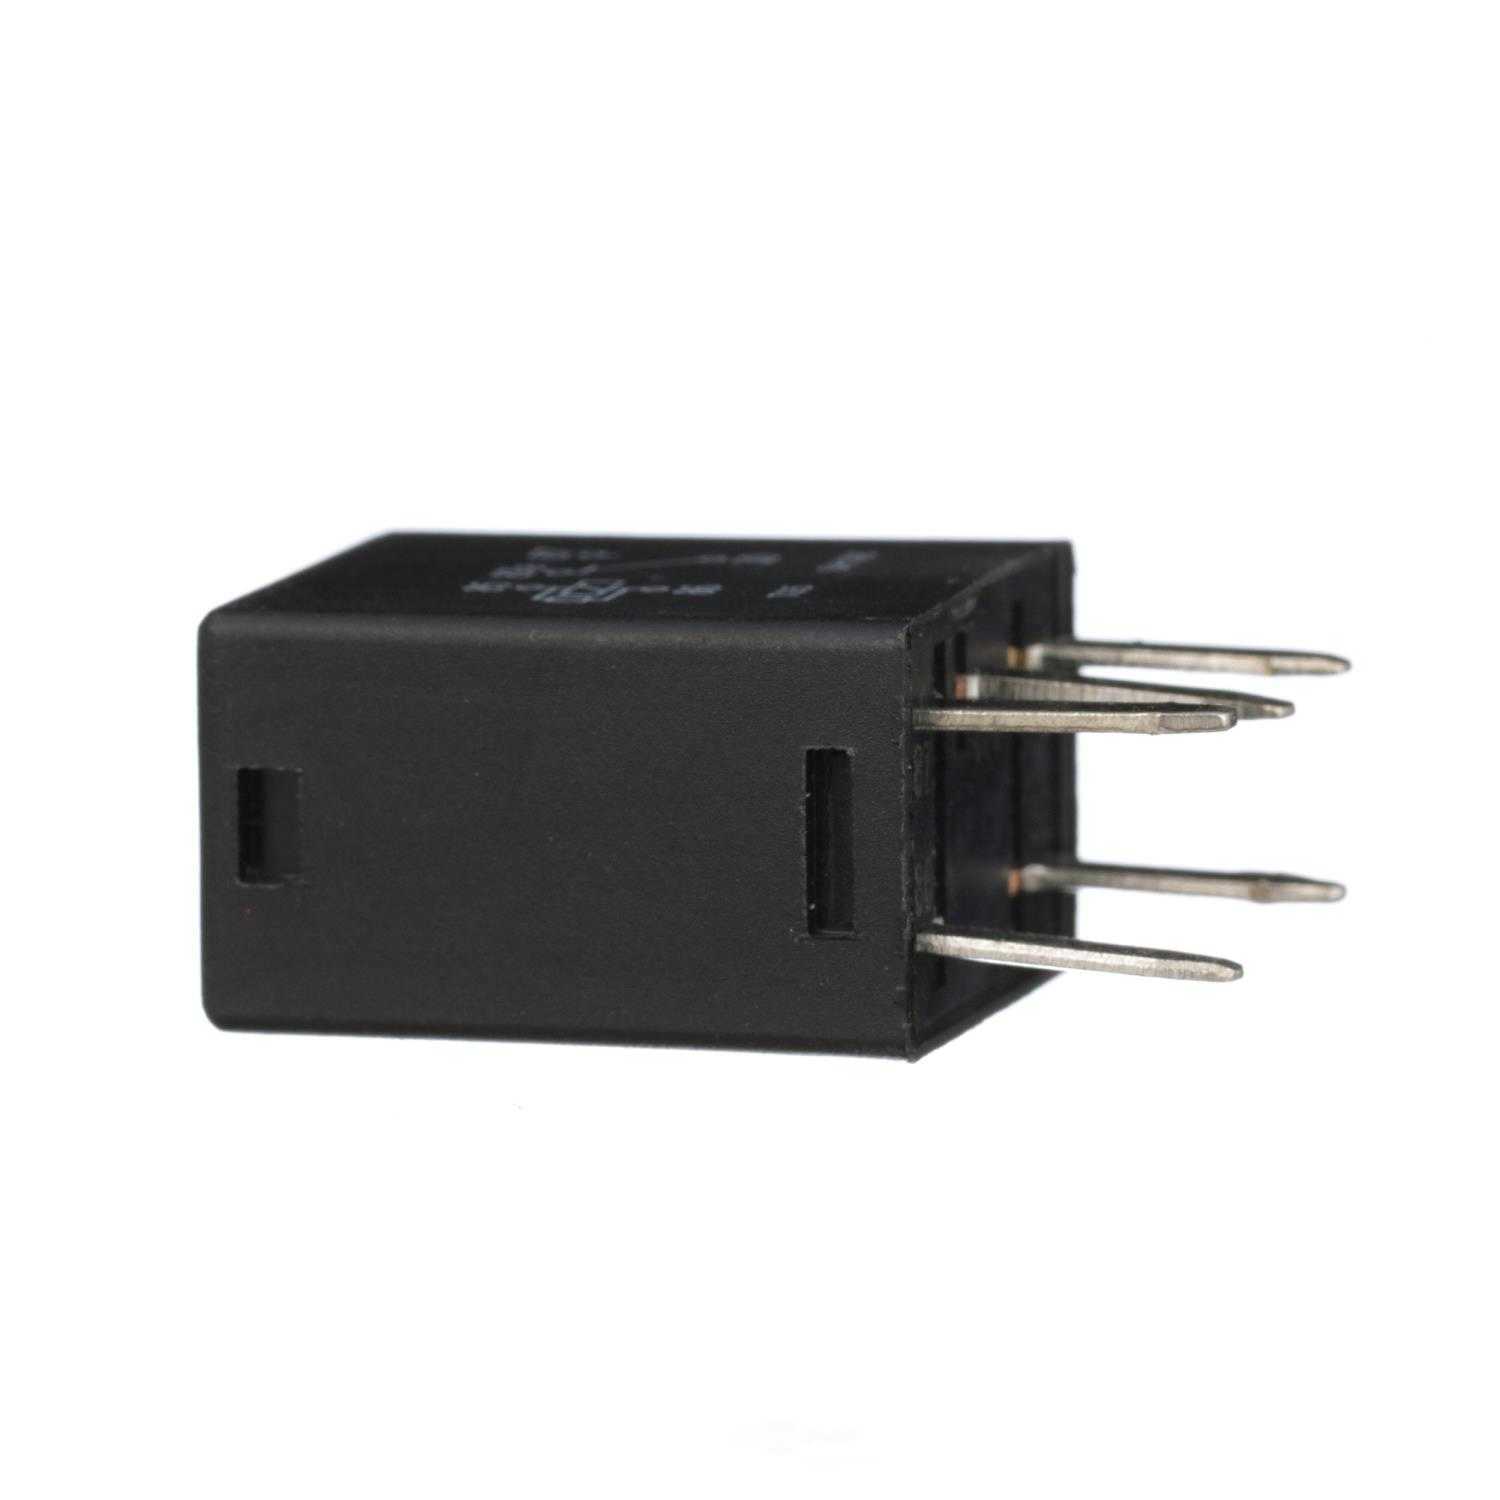 STANDARD MOTOR PRODUCTS - Illuminated Entry Relay - STA RY-232